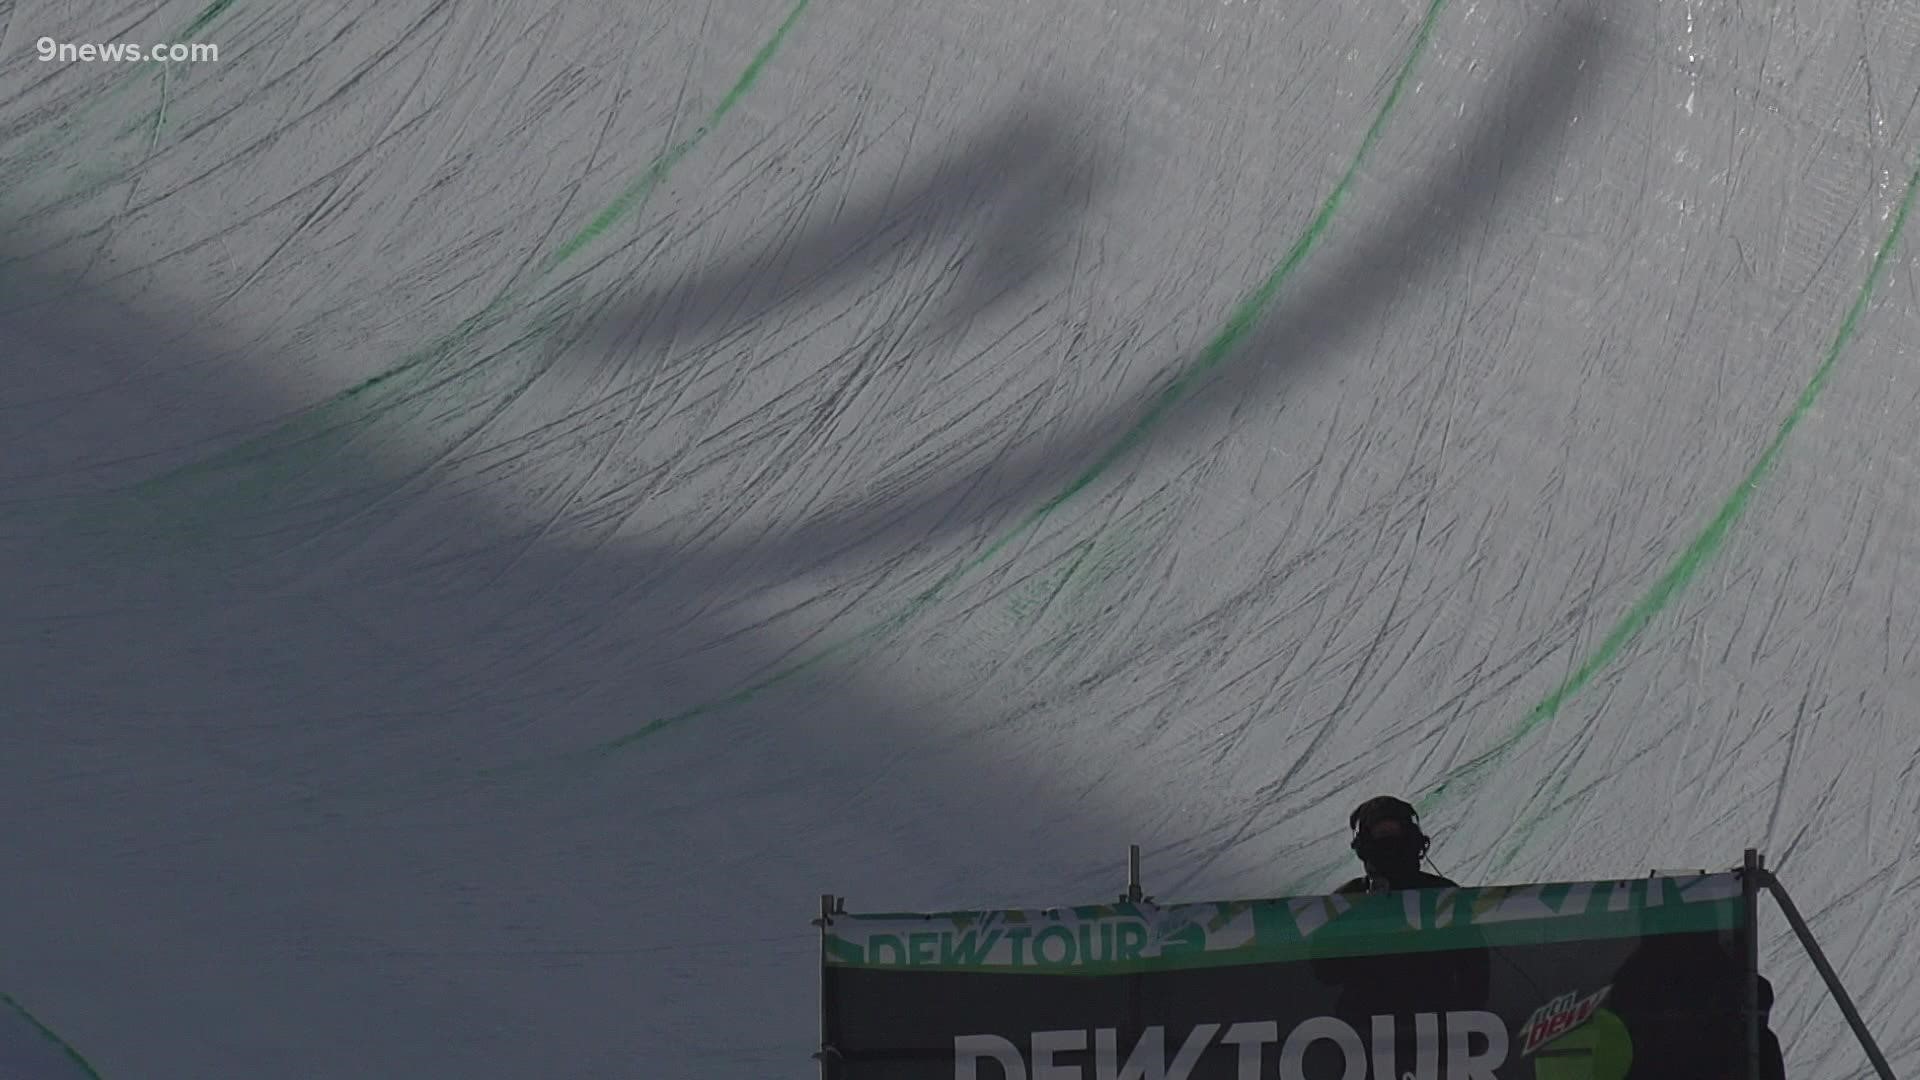 Red Gerard, Shaun White and Aaron Blunt will be competing in the final rounds of the 2021 Dew Tour at Copper Mountain this weekend.